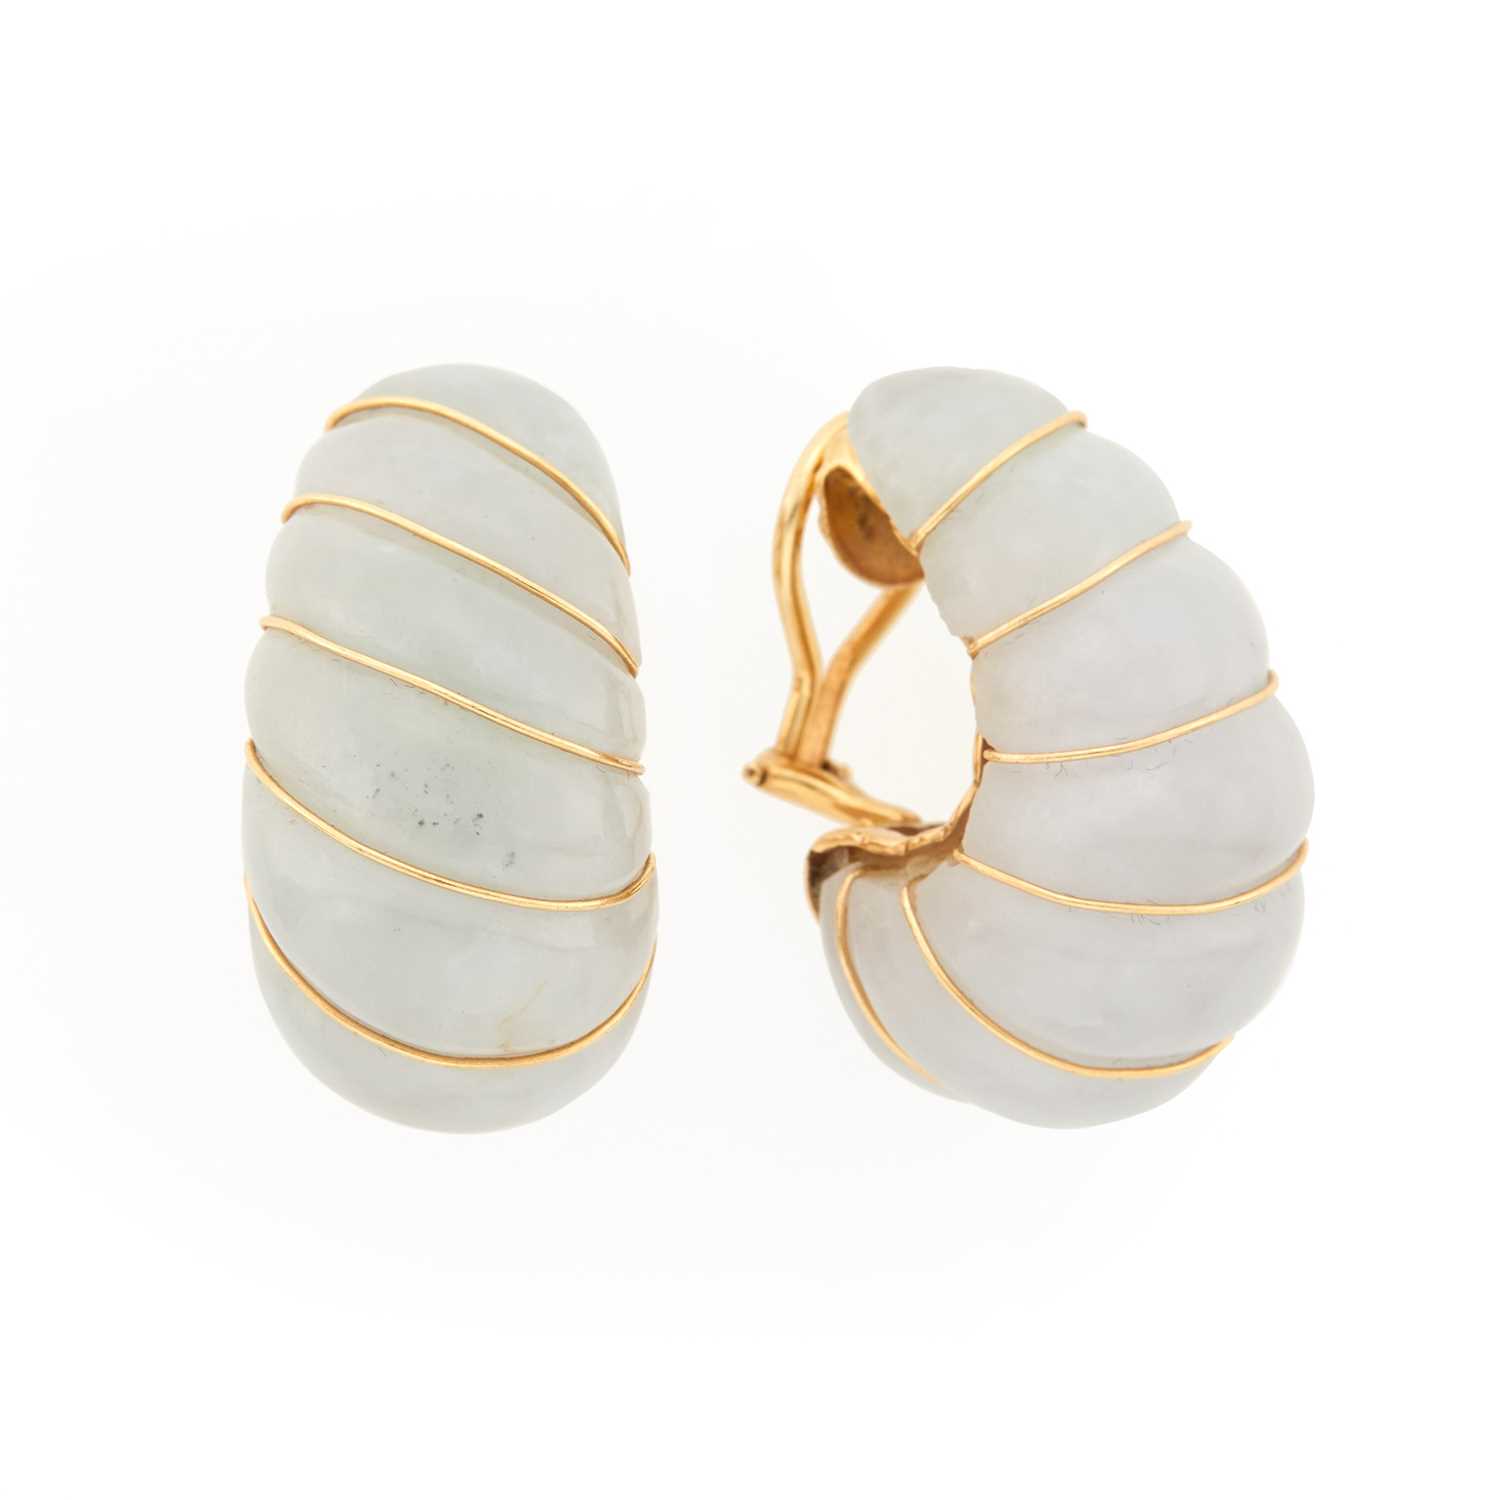 Lot 2039 - Pair of Gold and Carved White Jade Shrimp Earclips